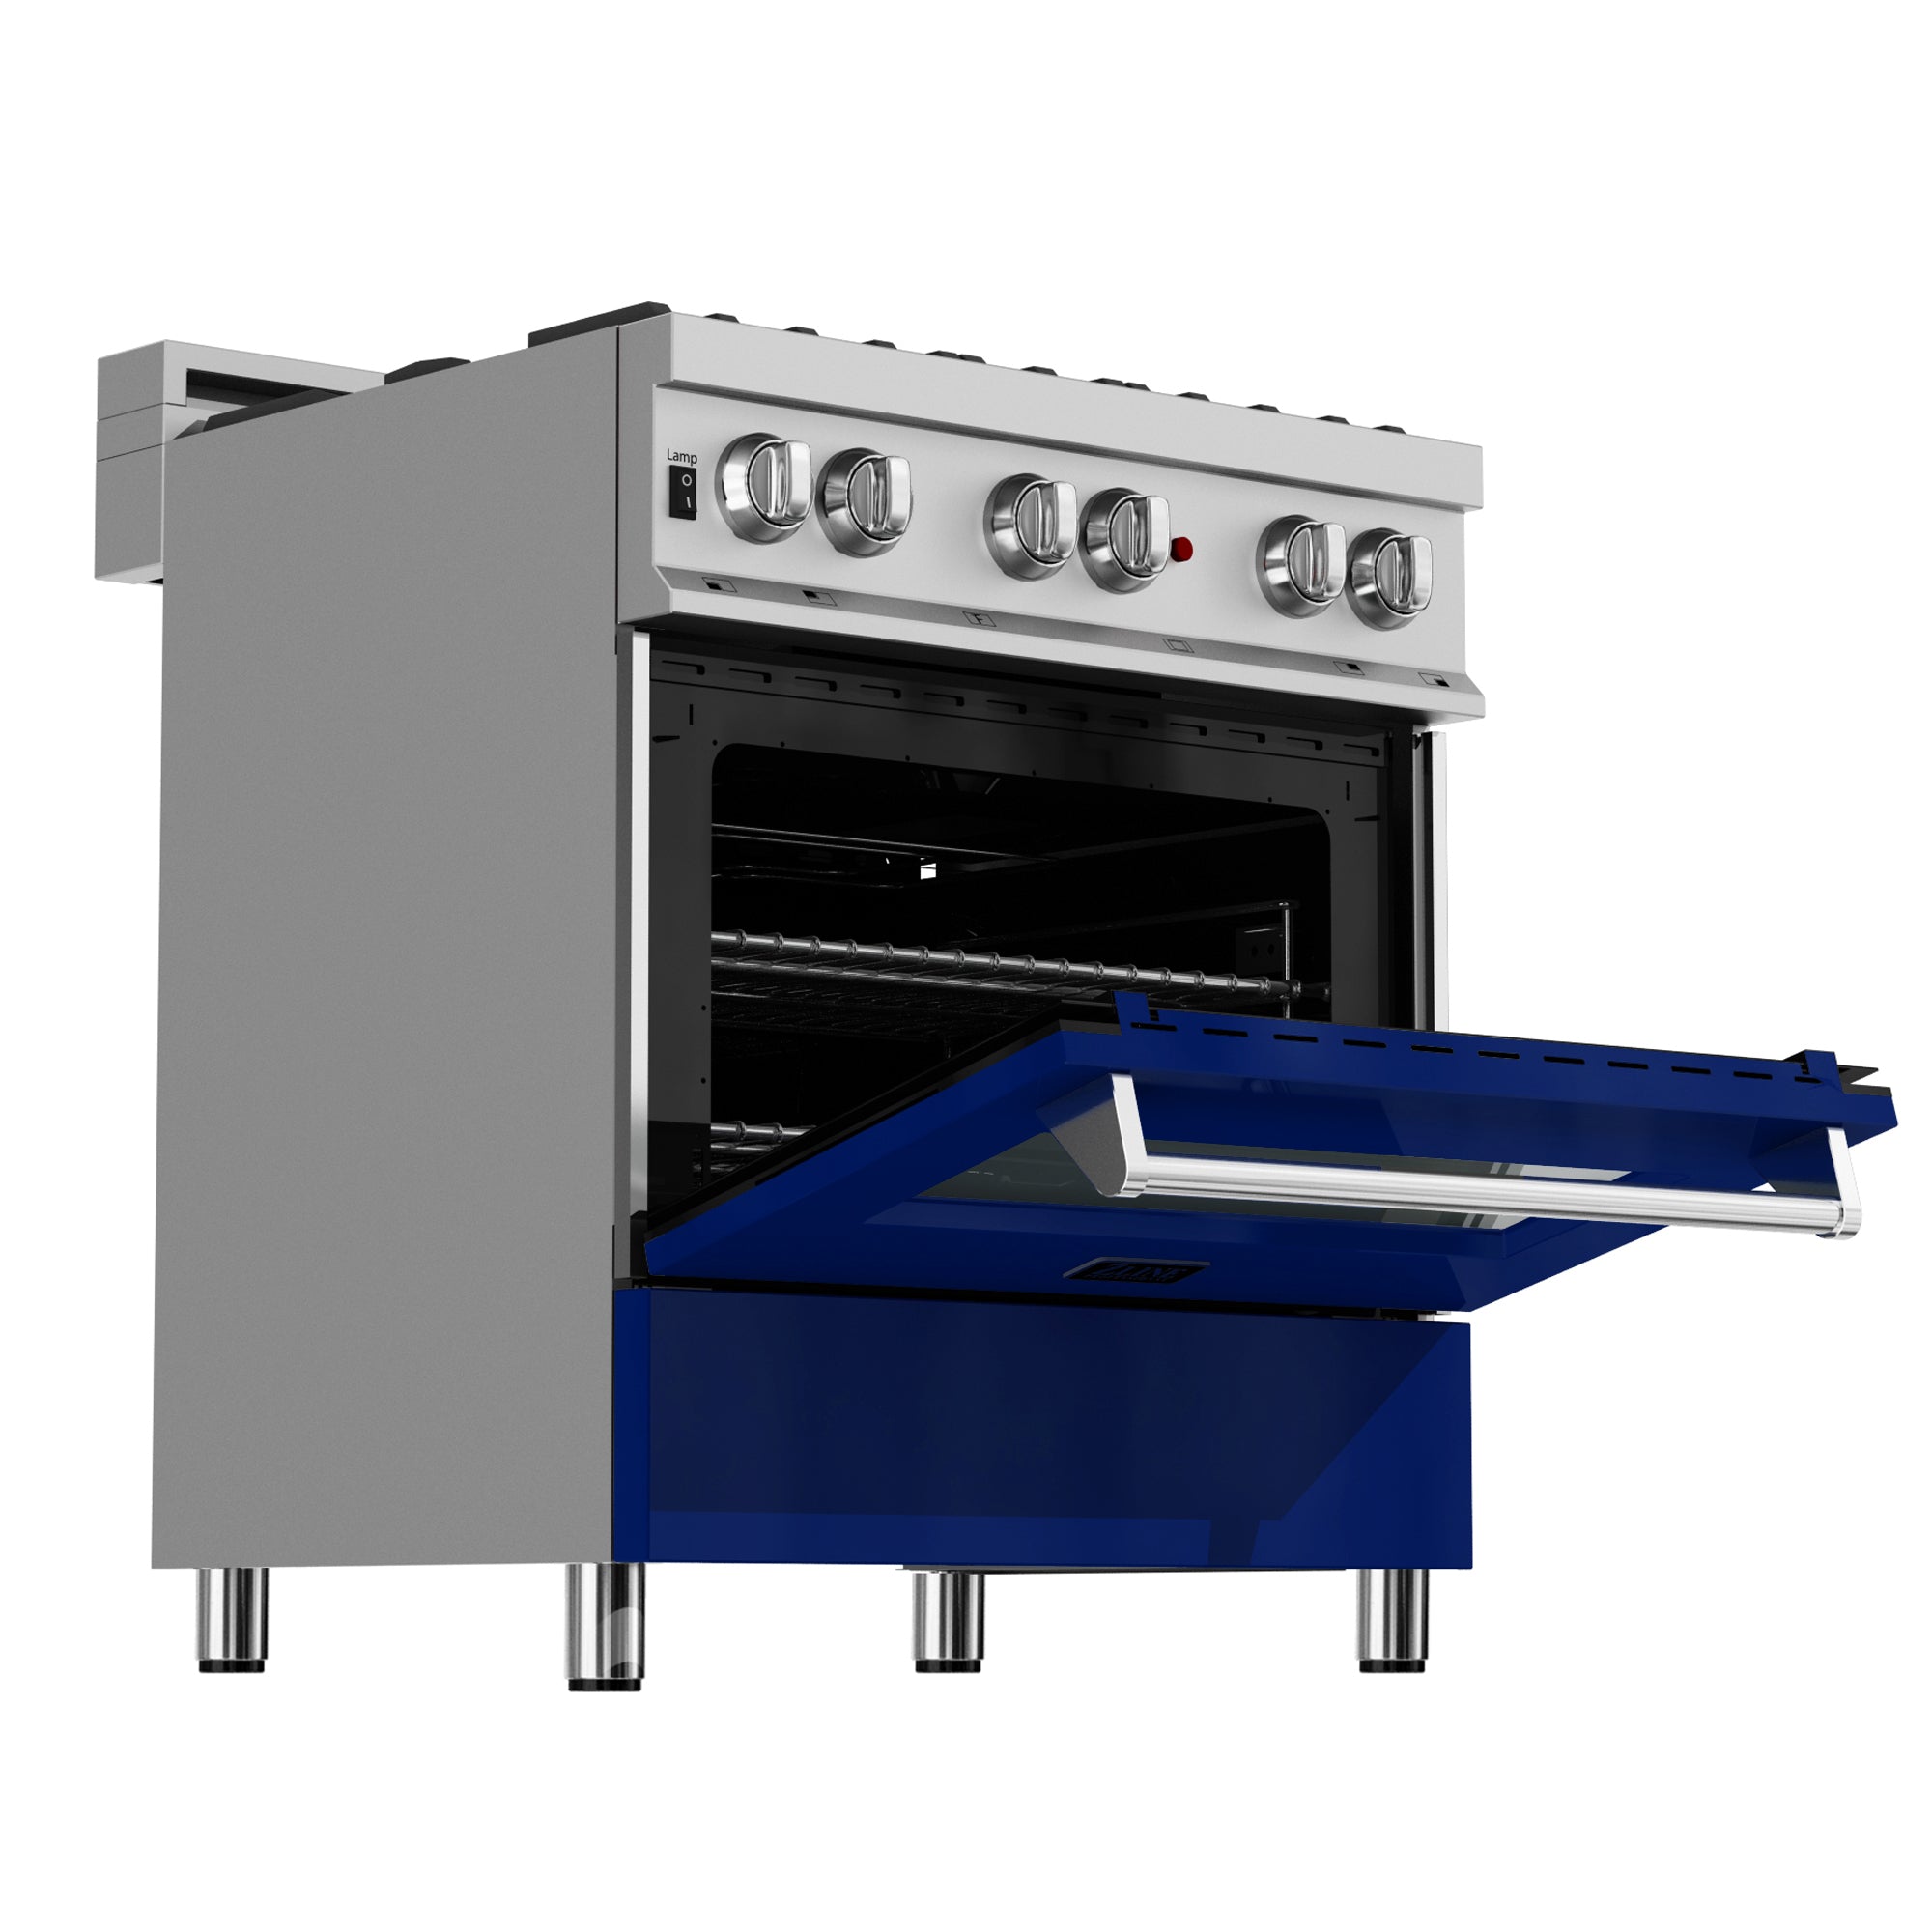 ZLINE 30" 4.0 cu. ft. Dual Fuel Range with Gas Stove and Electric Oven in Fingerprint Resistant Stainless Steel and Blue Gloss Door (RAS-BG-30)